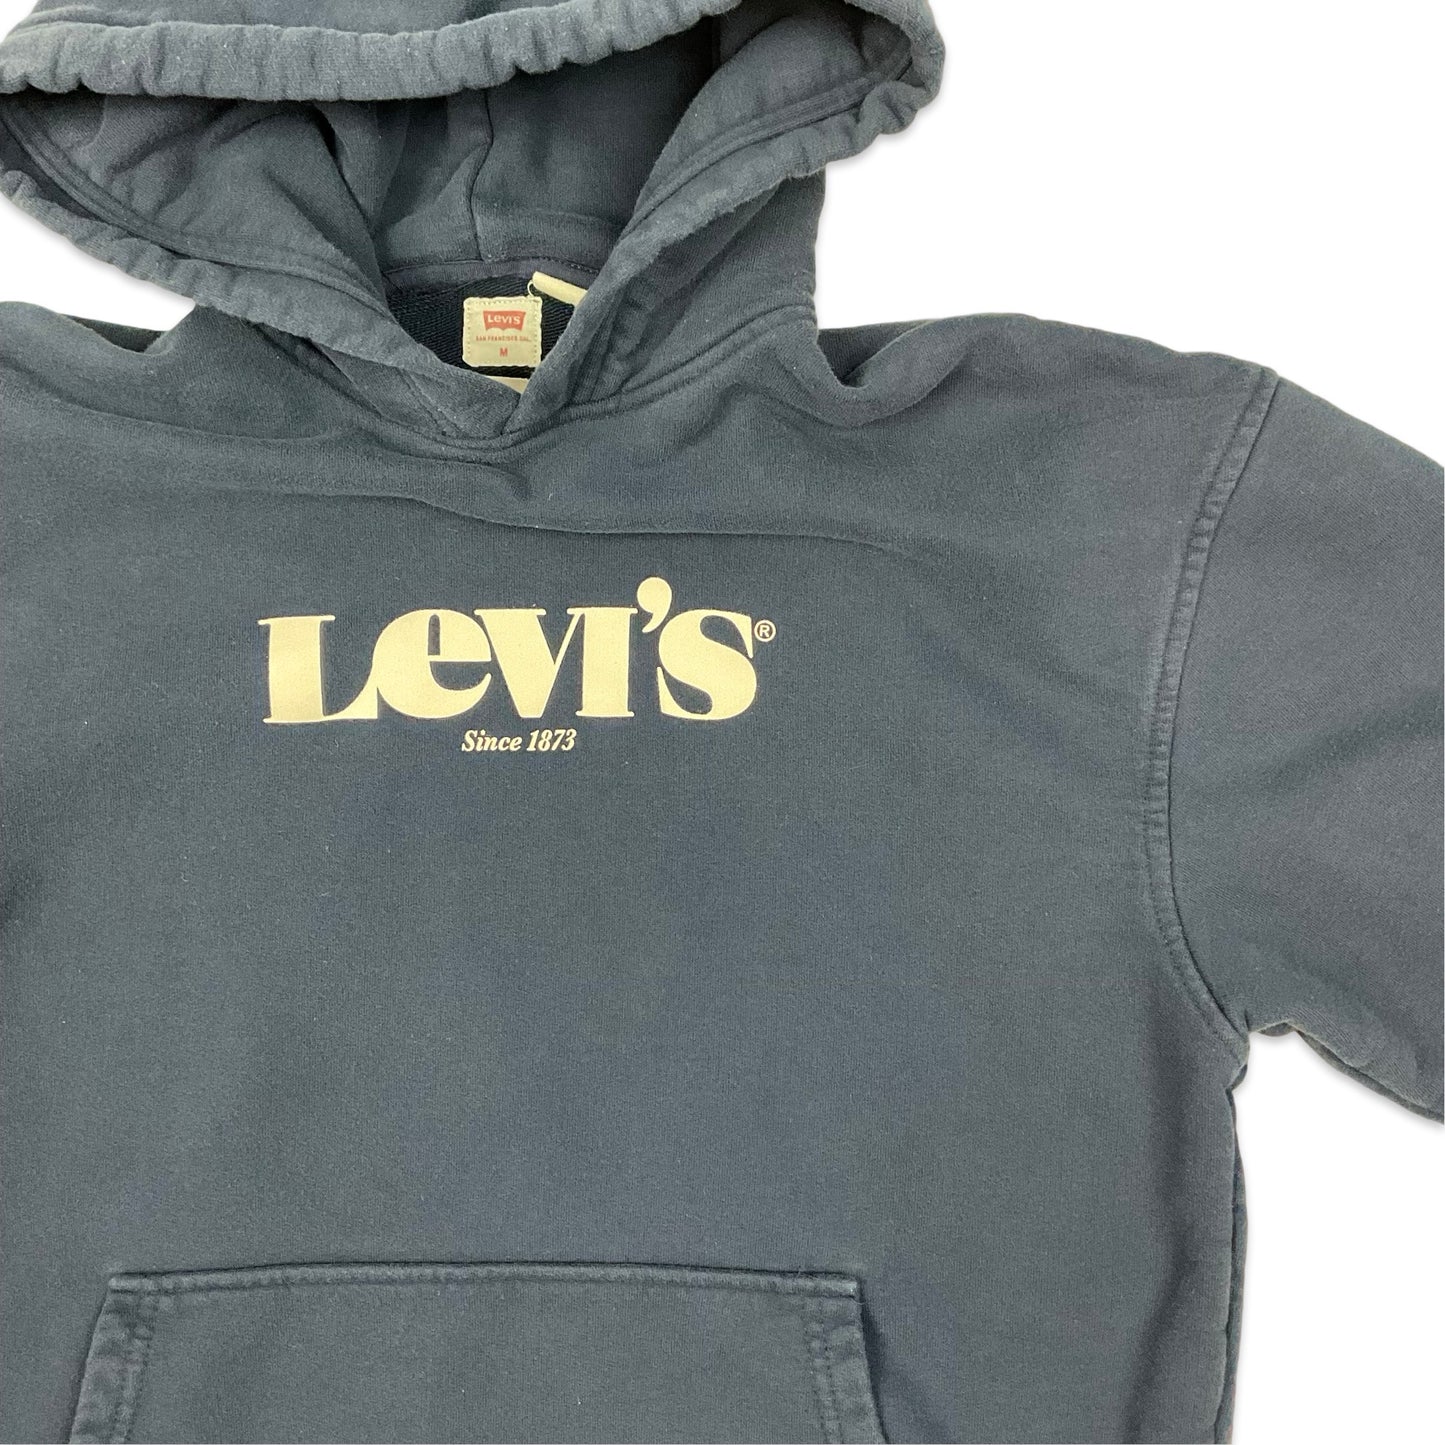 Levi's Navy Spell Out Pullover Hoodie M